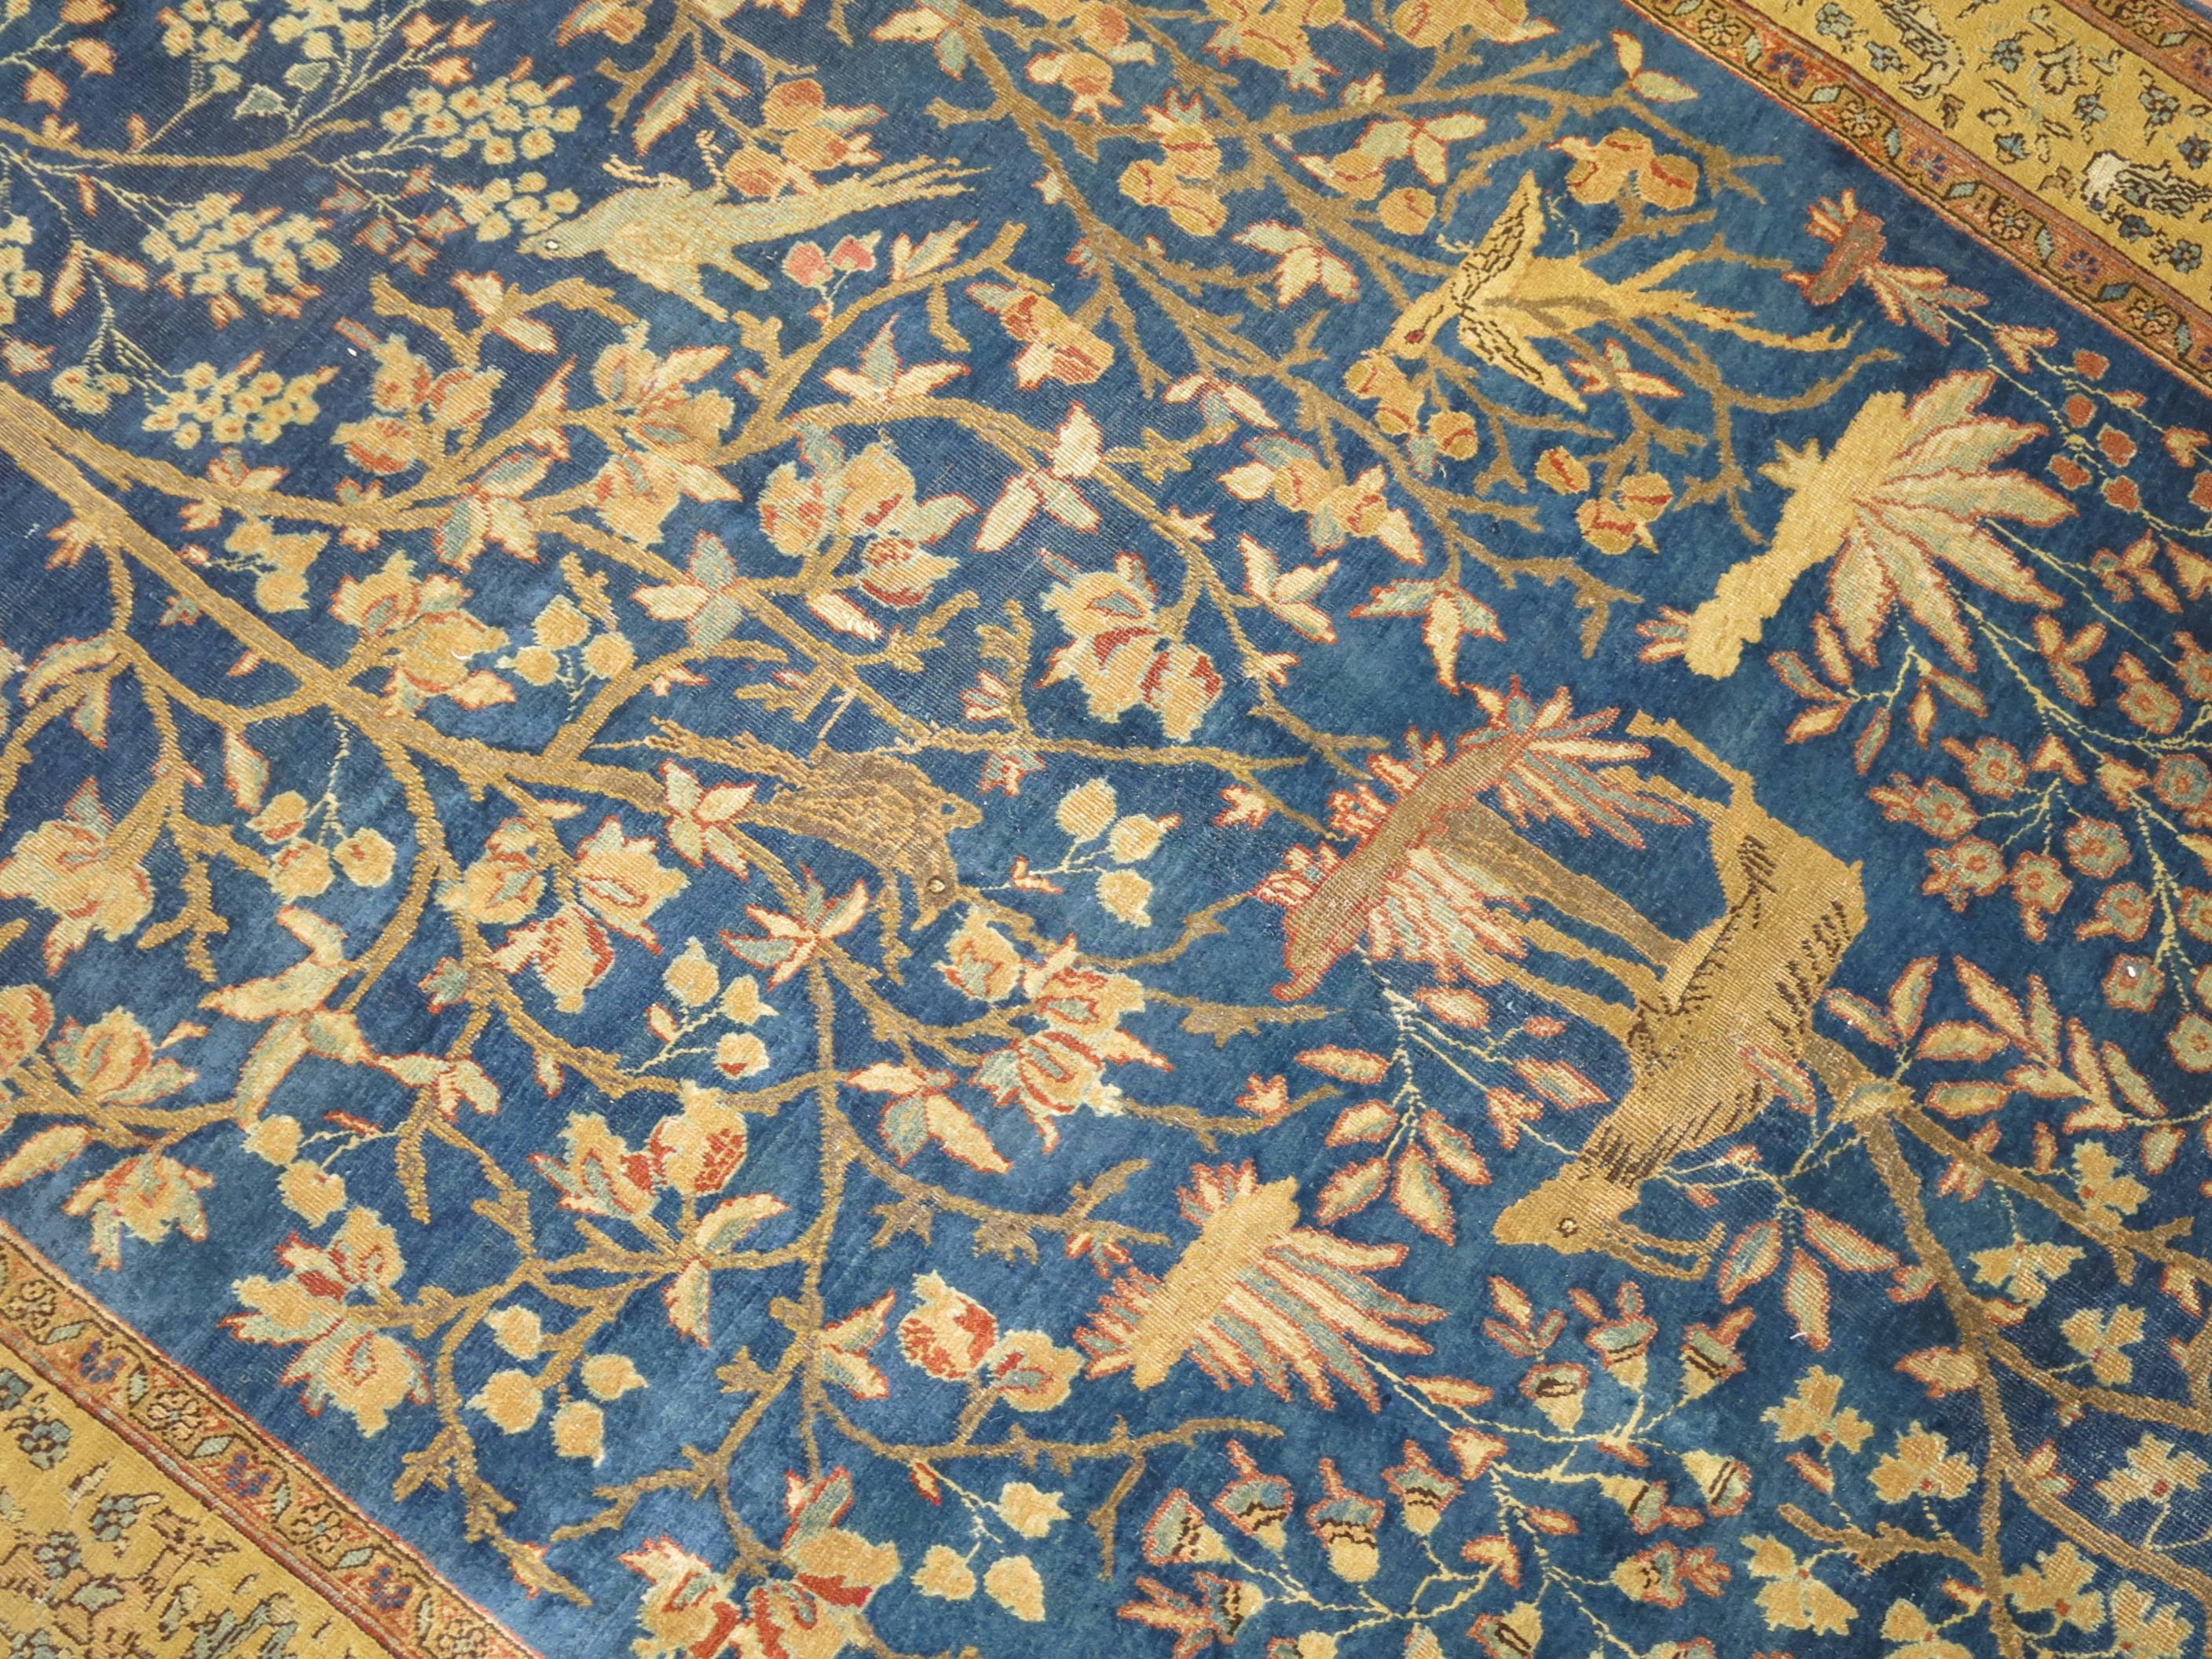 An early 20th century decorative Caliber, Persian Tabriz previously owned by a private collector in warm colors.